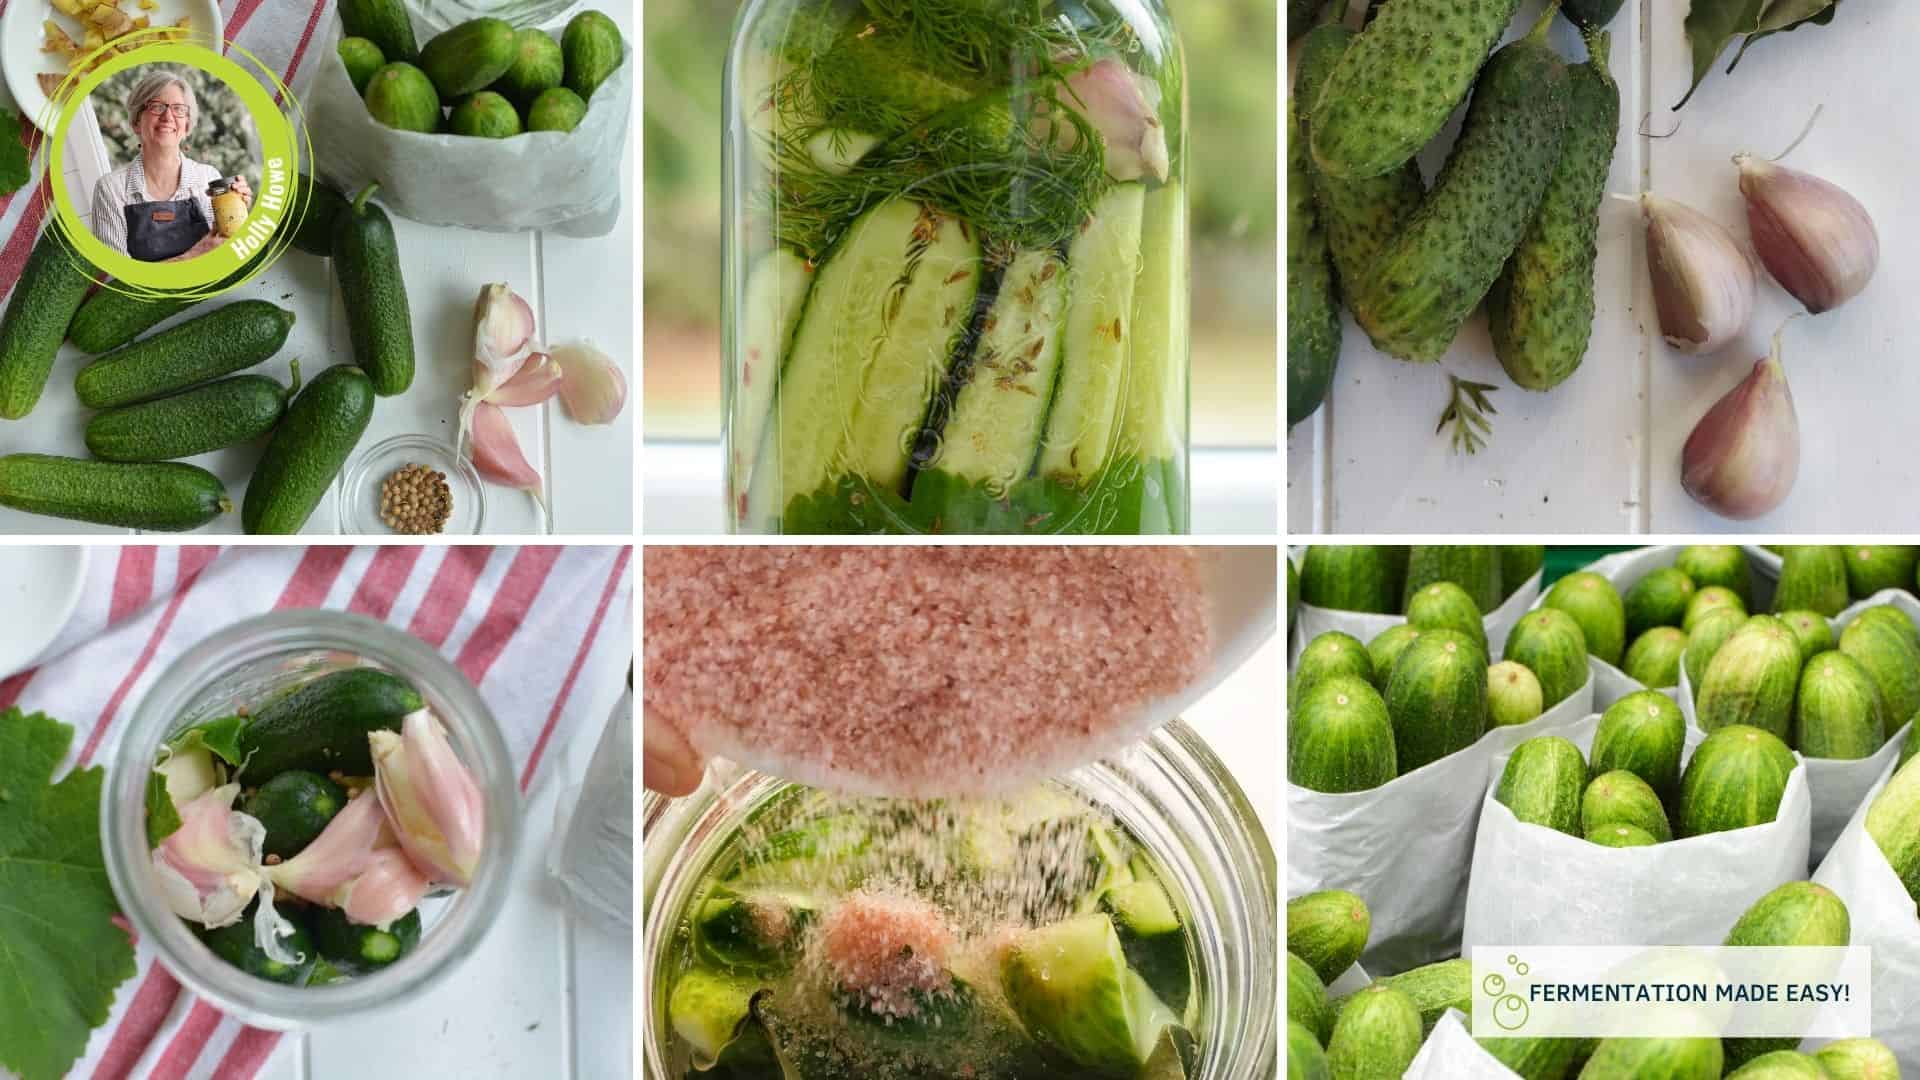 A six image grid showing process of fermenting pickles (tools, pickles in a jar, etc) | MakeSauerkraut.com